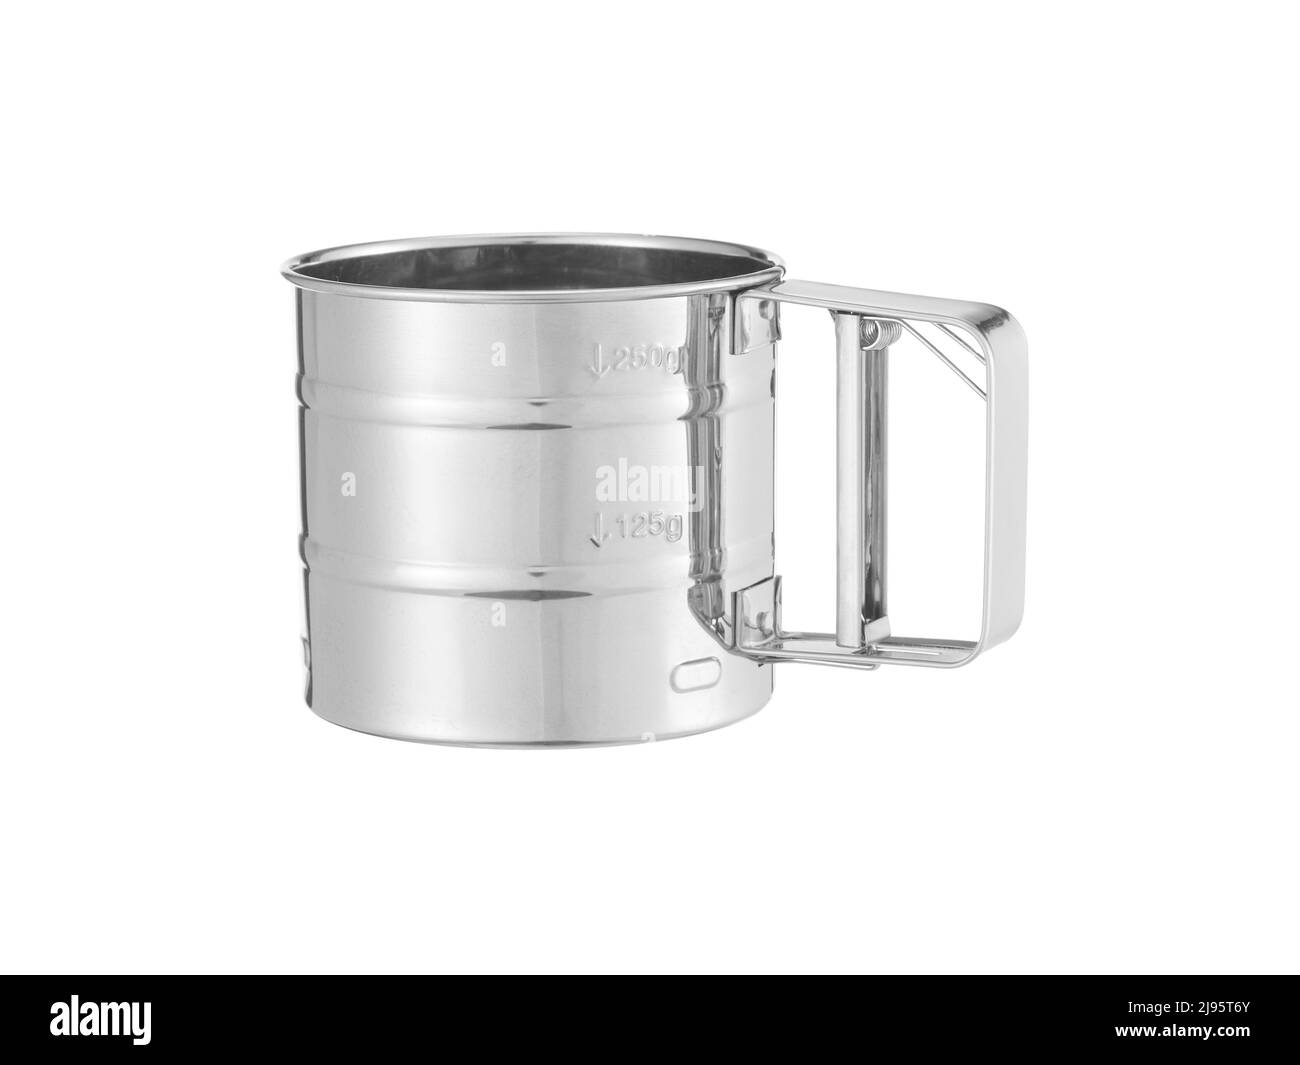 https://c8.alamy.com/comp/2J95T6Y/flour-sifter-isolated-on-white-background-2J95T6Y.jpg